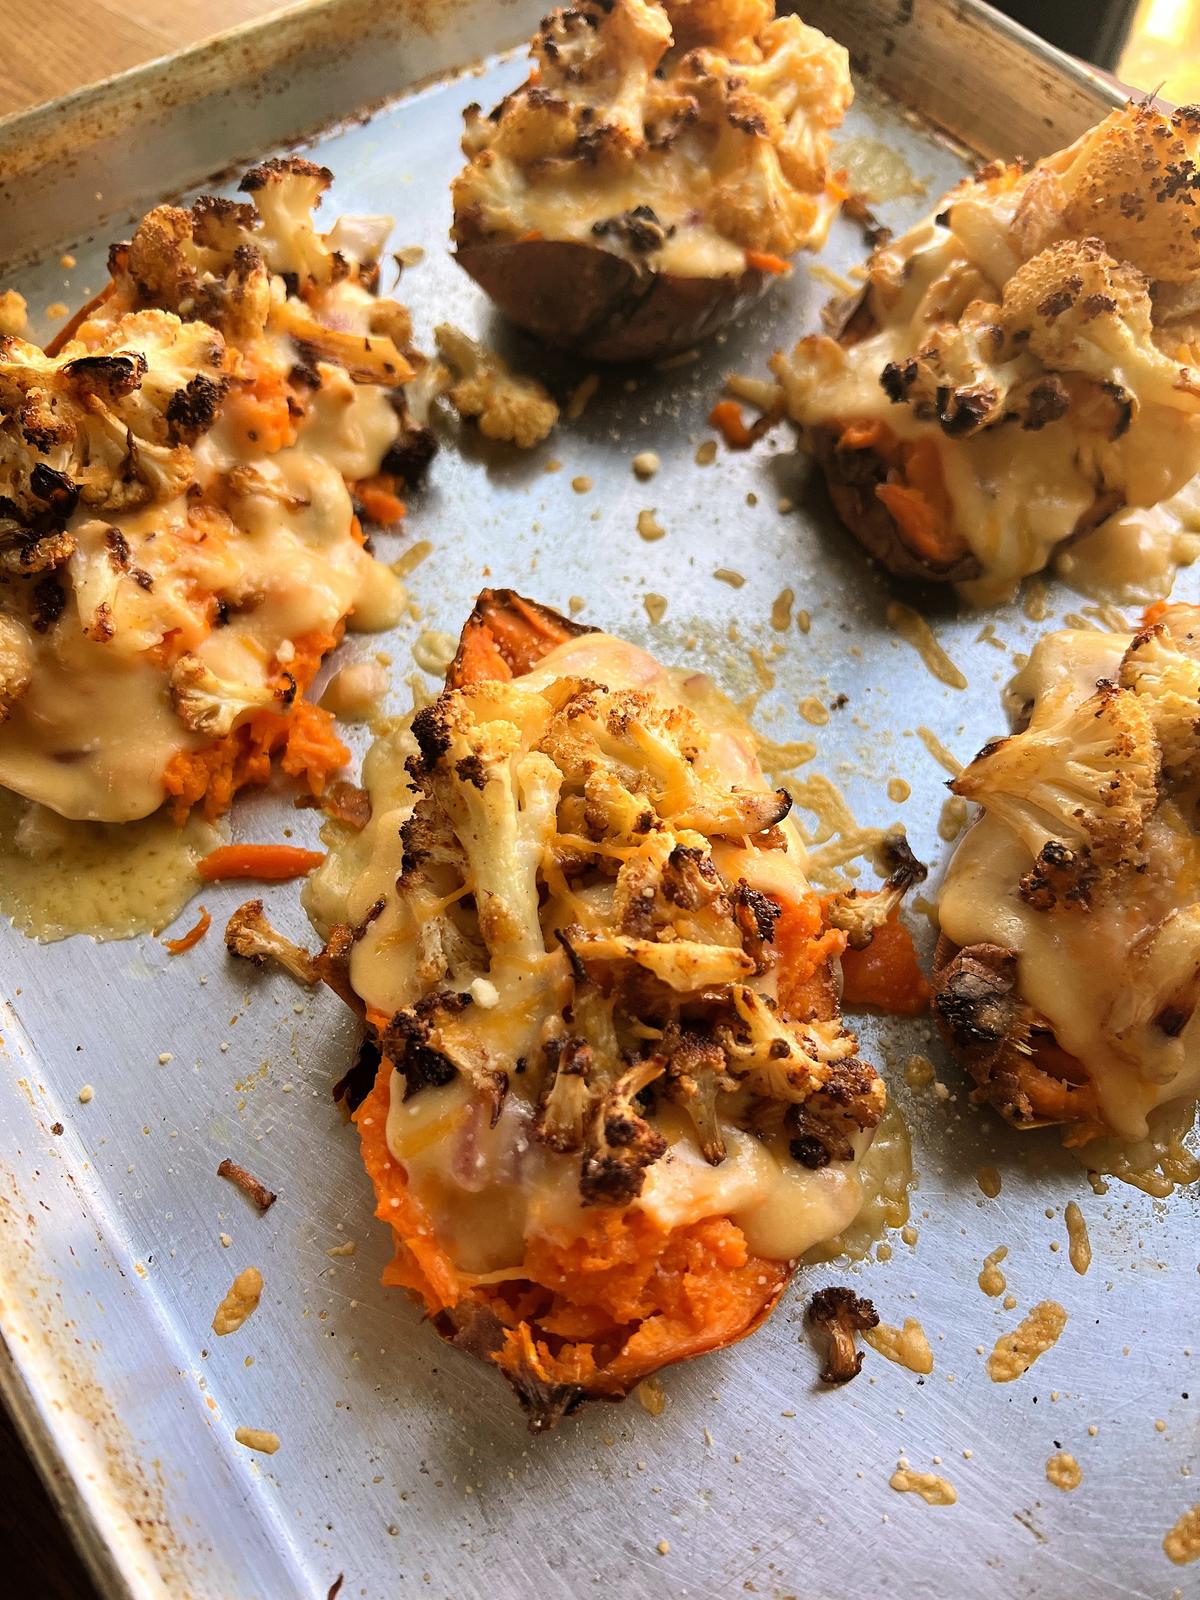 These double-baked cauliflower-stuffed sweet potatoes come together quickly with minimal effort and easy-to-find ingredients. (Gretchen McKay/Pittsburgh Post-Gazette/TNS)